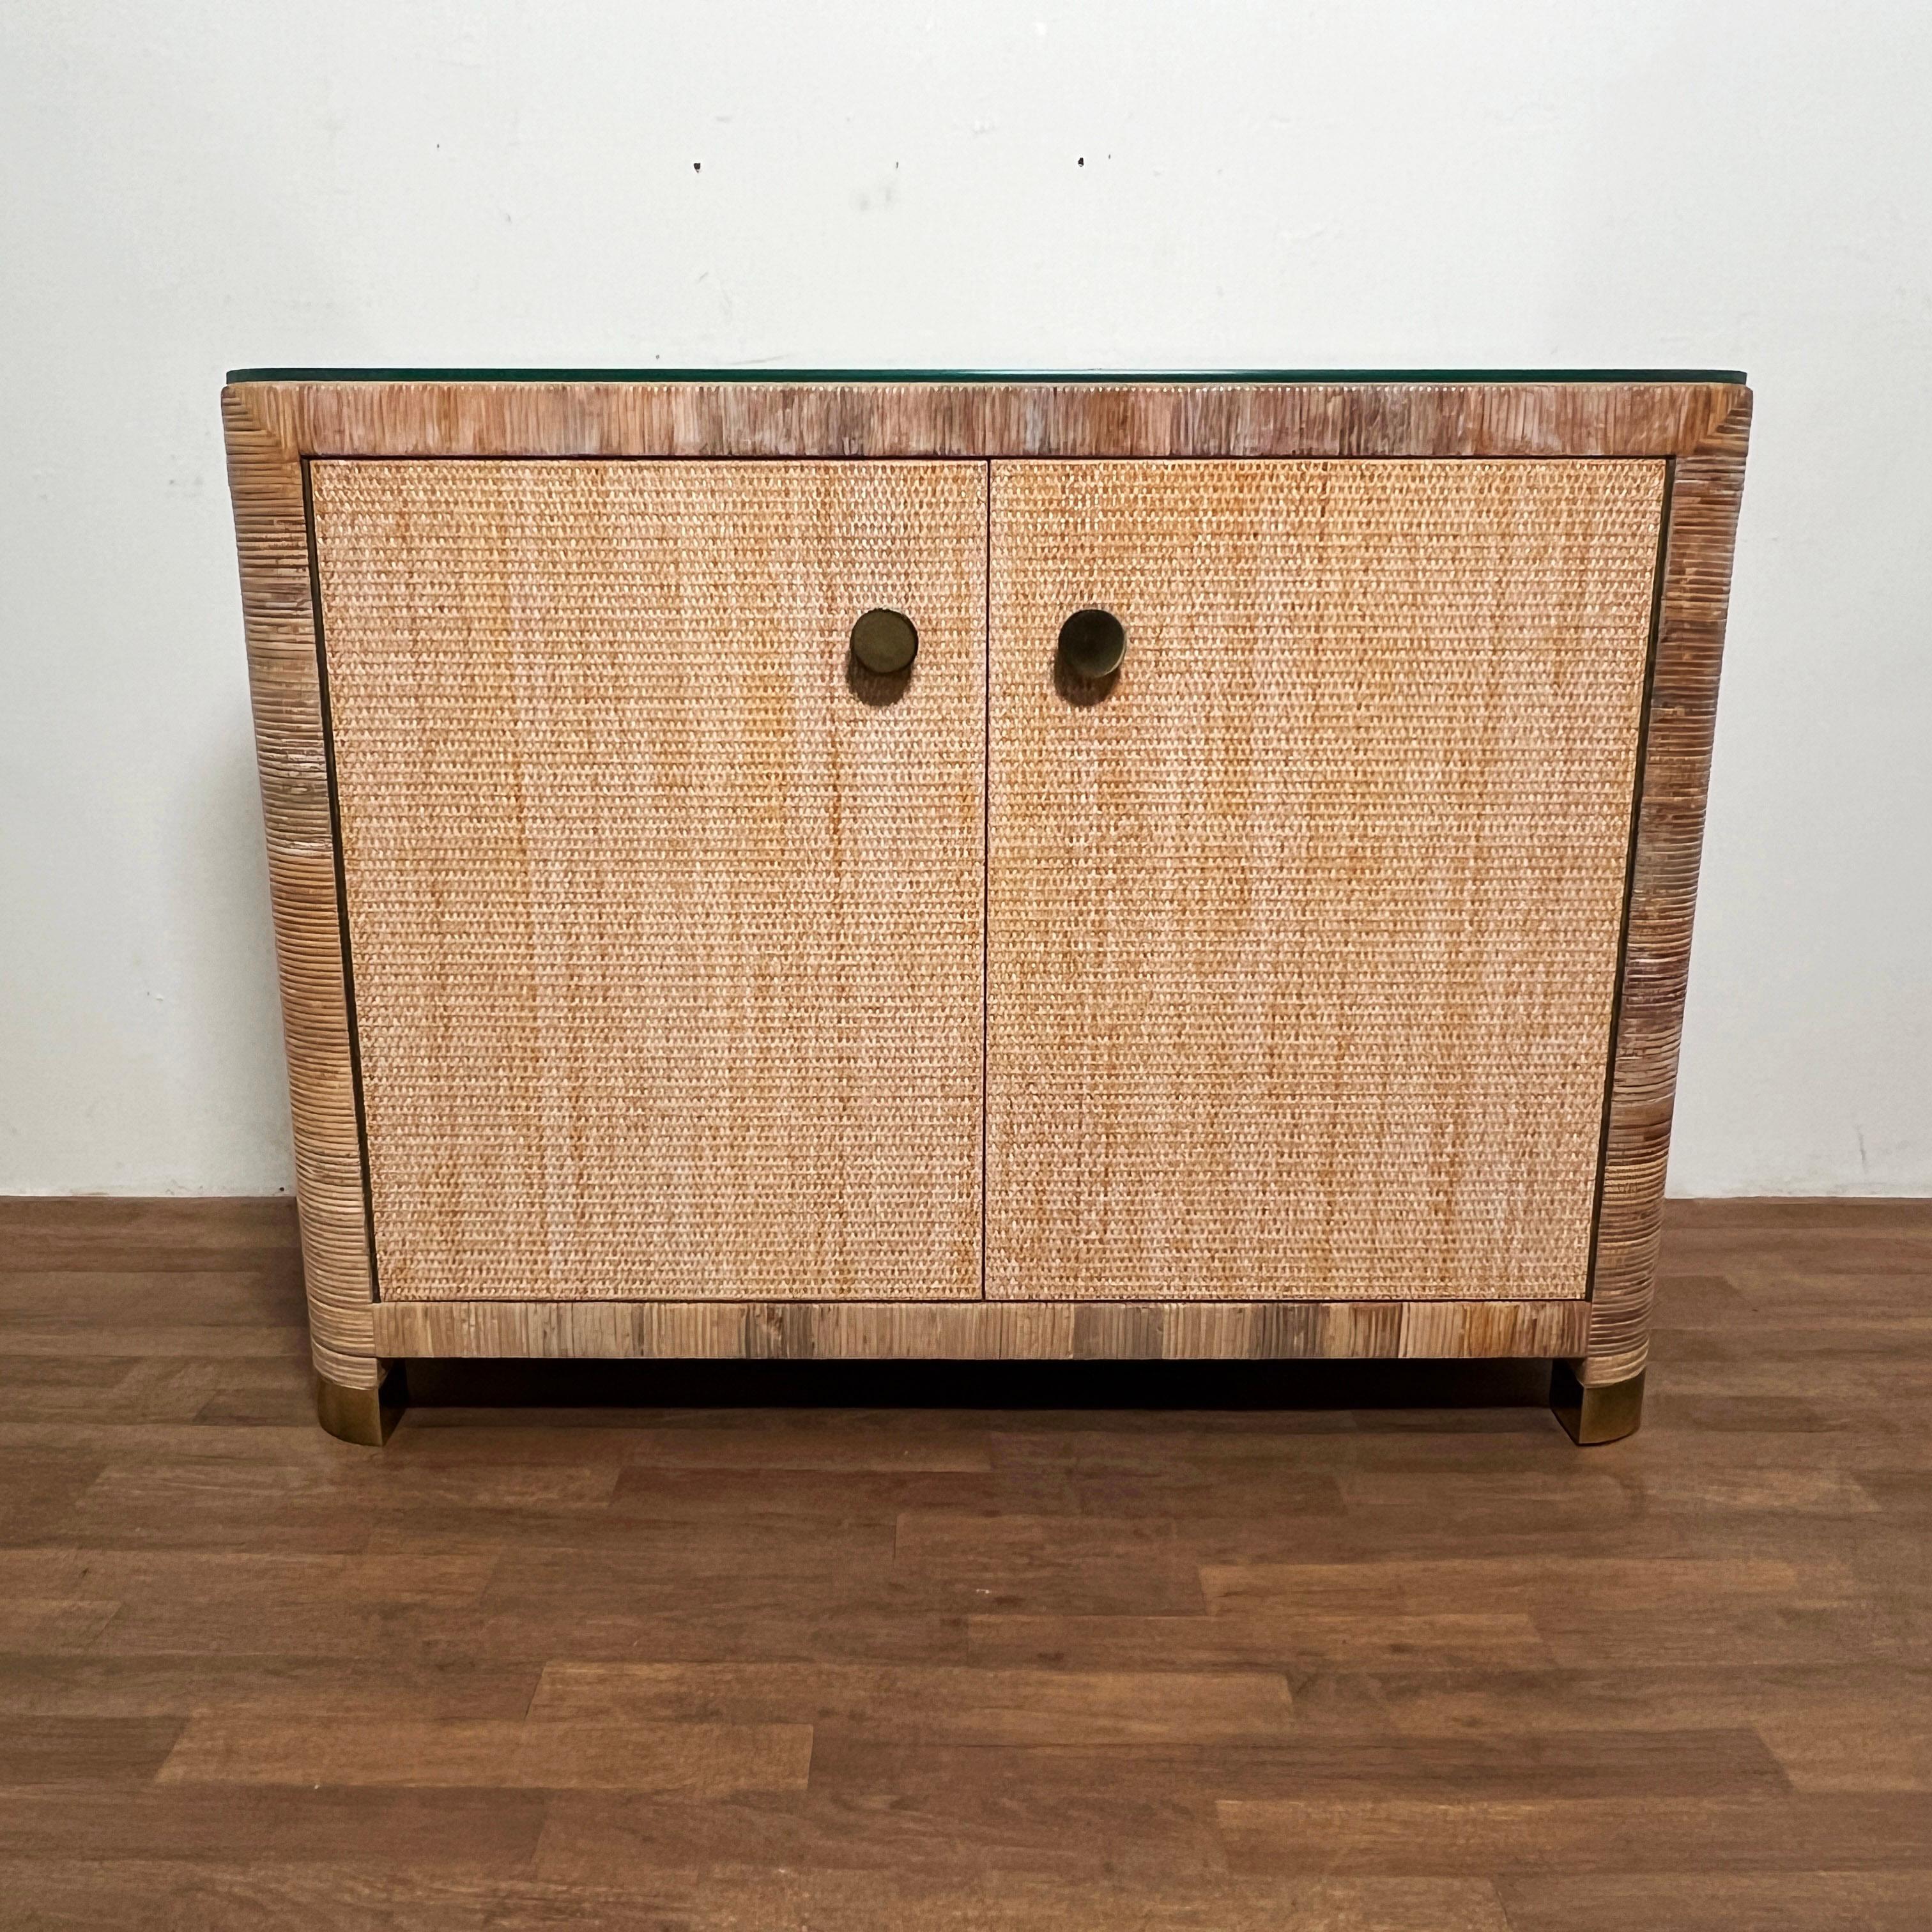 Two door cane and rattan wrapped cabinet by Bielecky Brothers of New York, circa 1980s. Brass clad feet, and brass handles, with bullnose front corners. Can be used with or without included glass top.